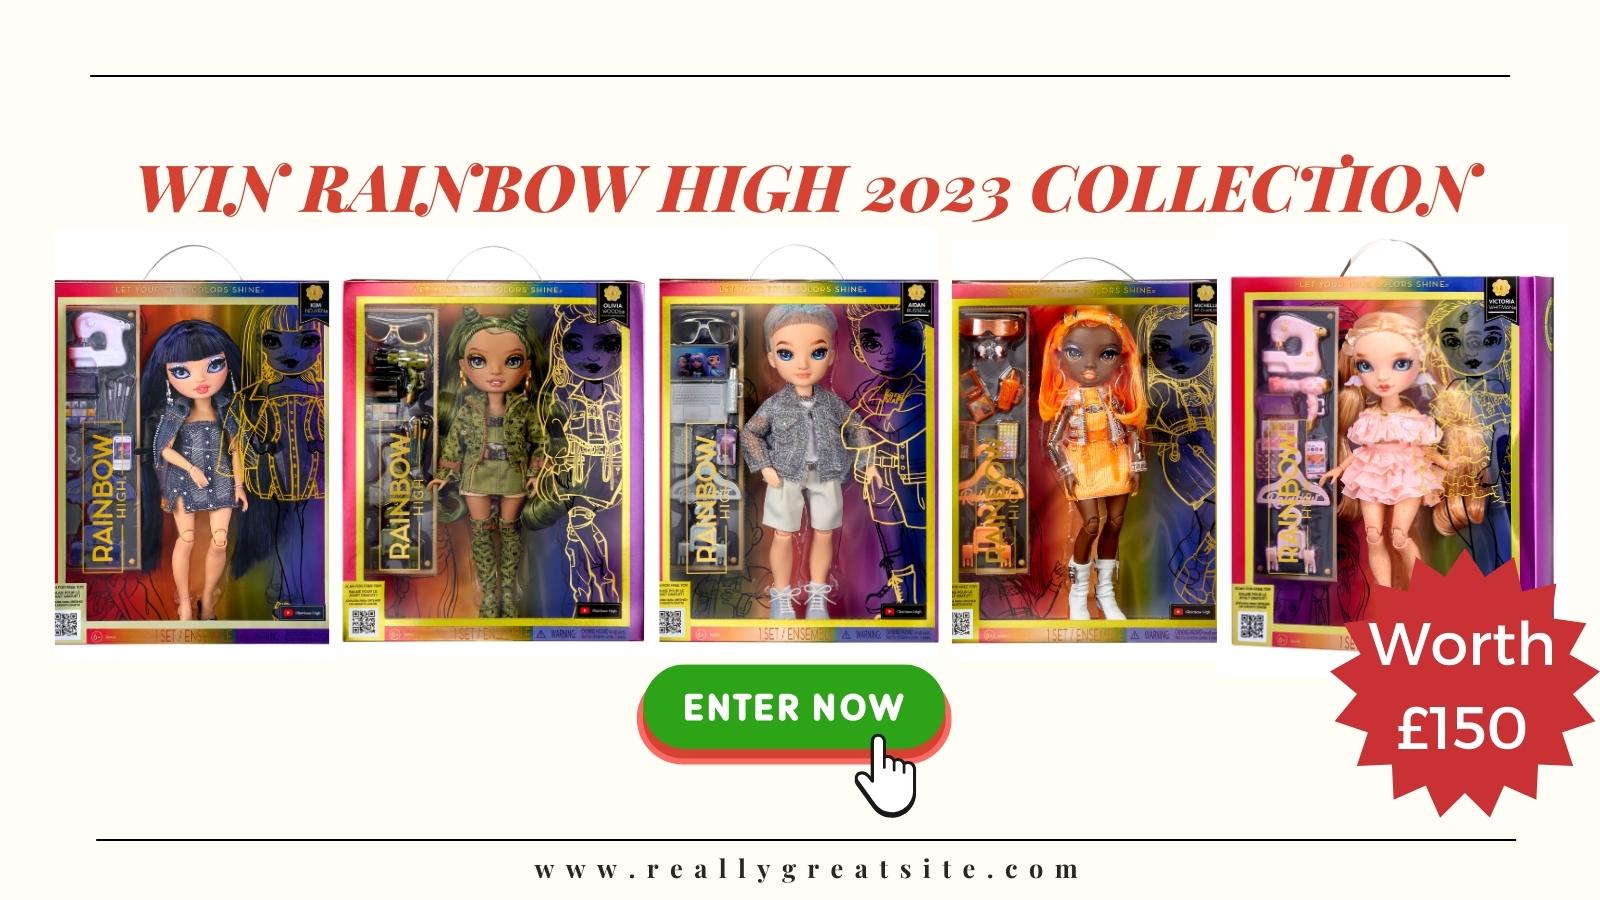 Win full range of Rainbow High Spring 23 collection worth £150